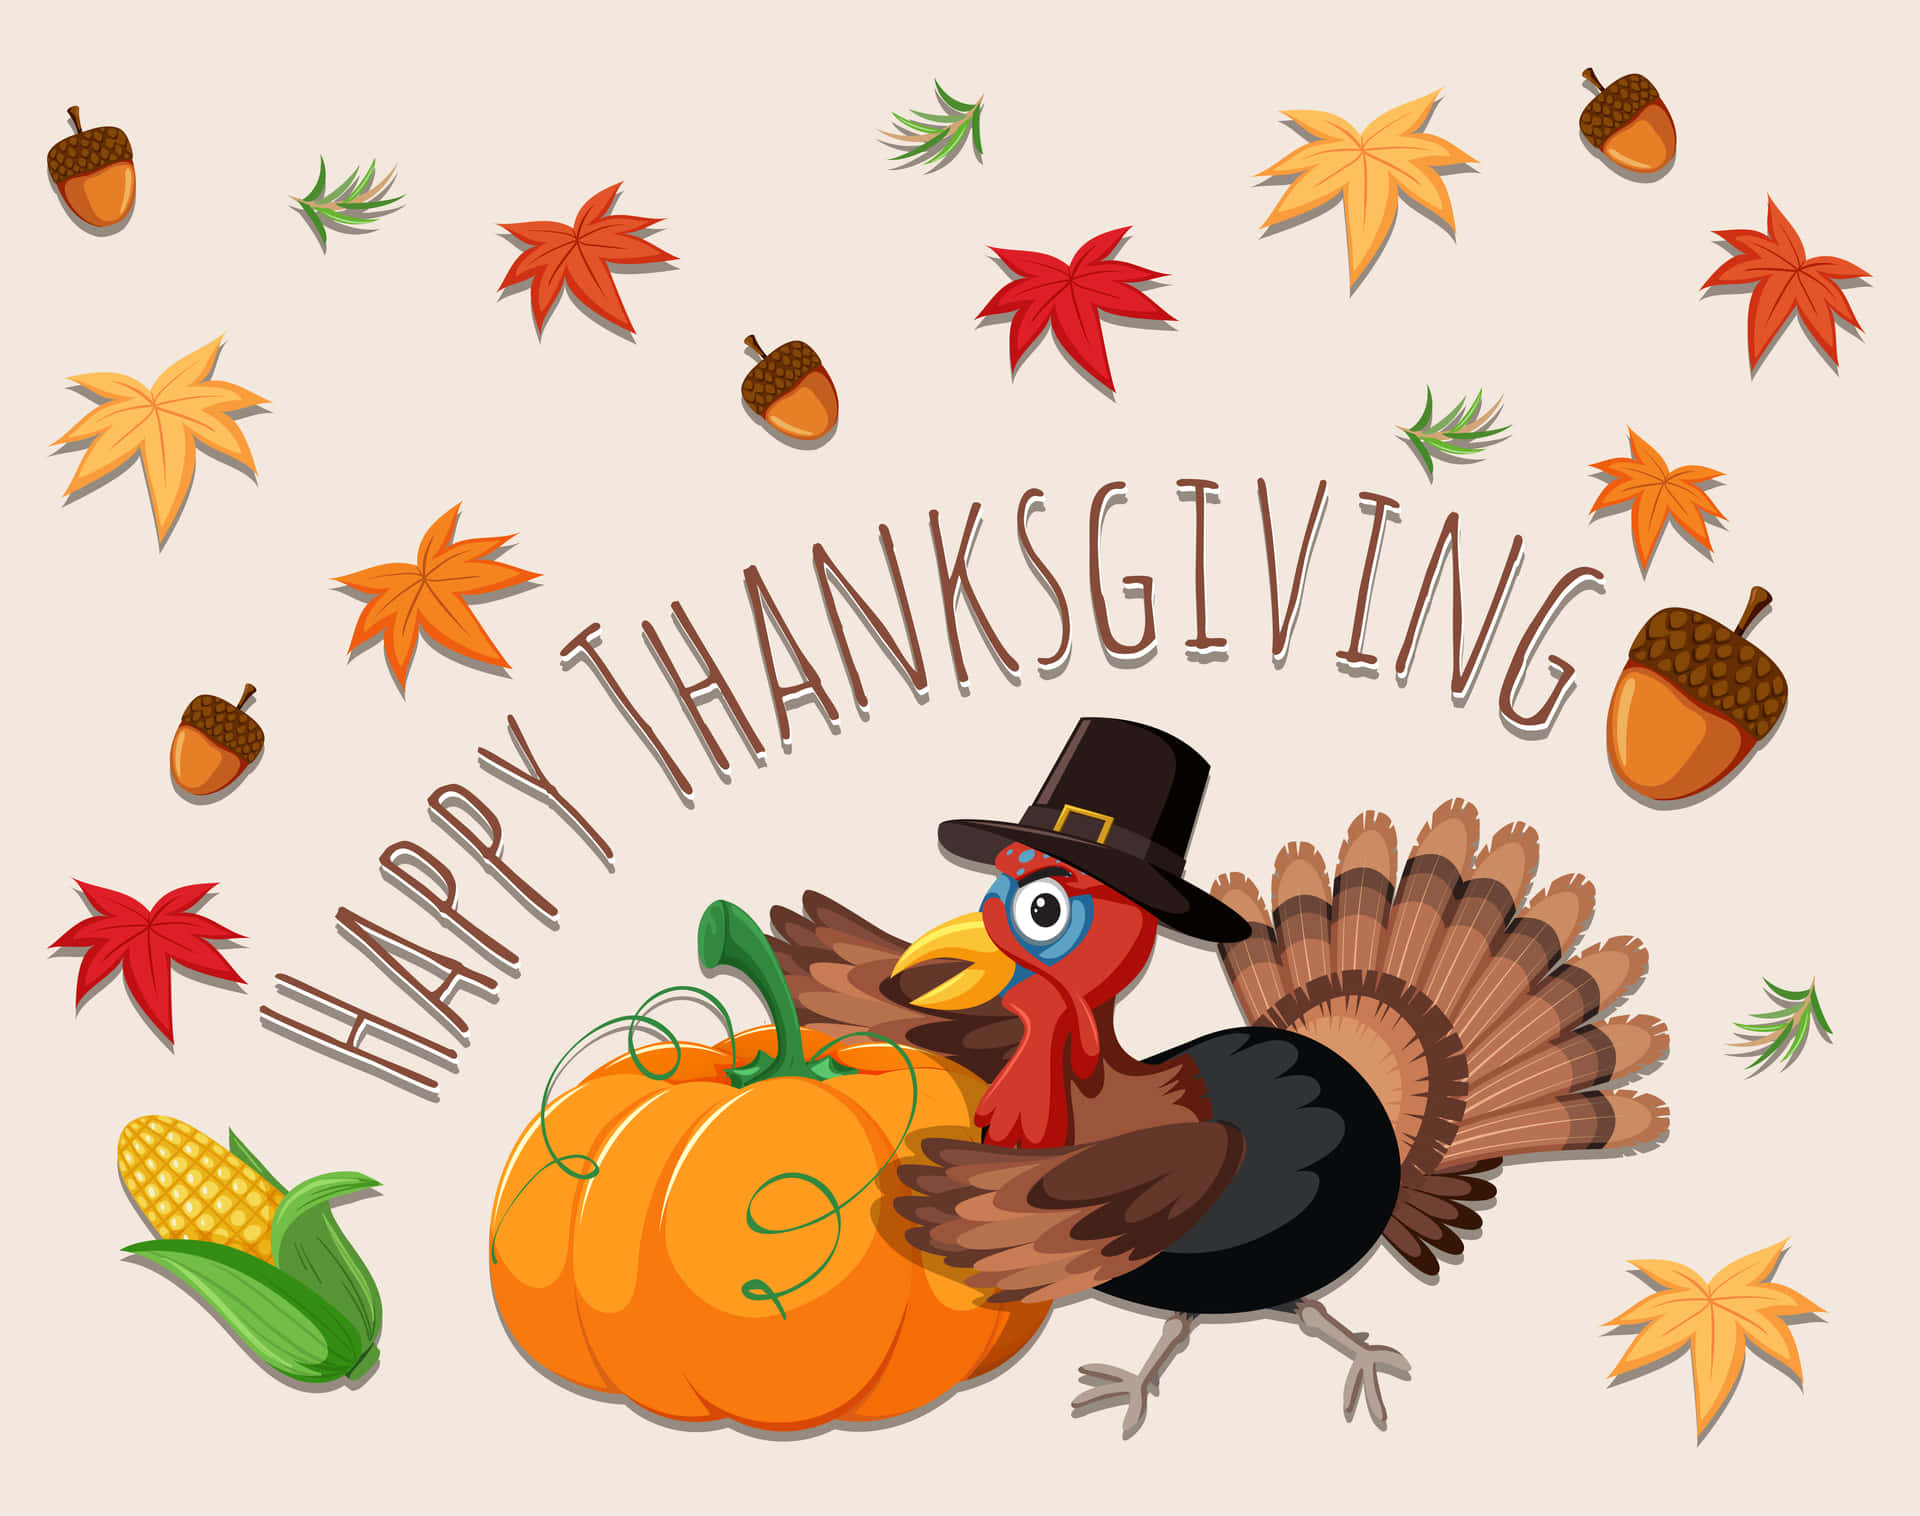 Download Celebrating Thanksgiving - Feast And Gratitude | Wallpapers.com